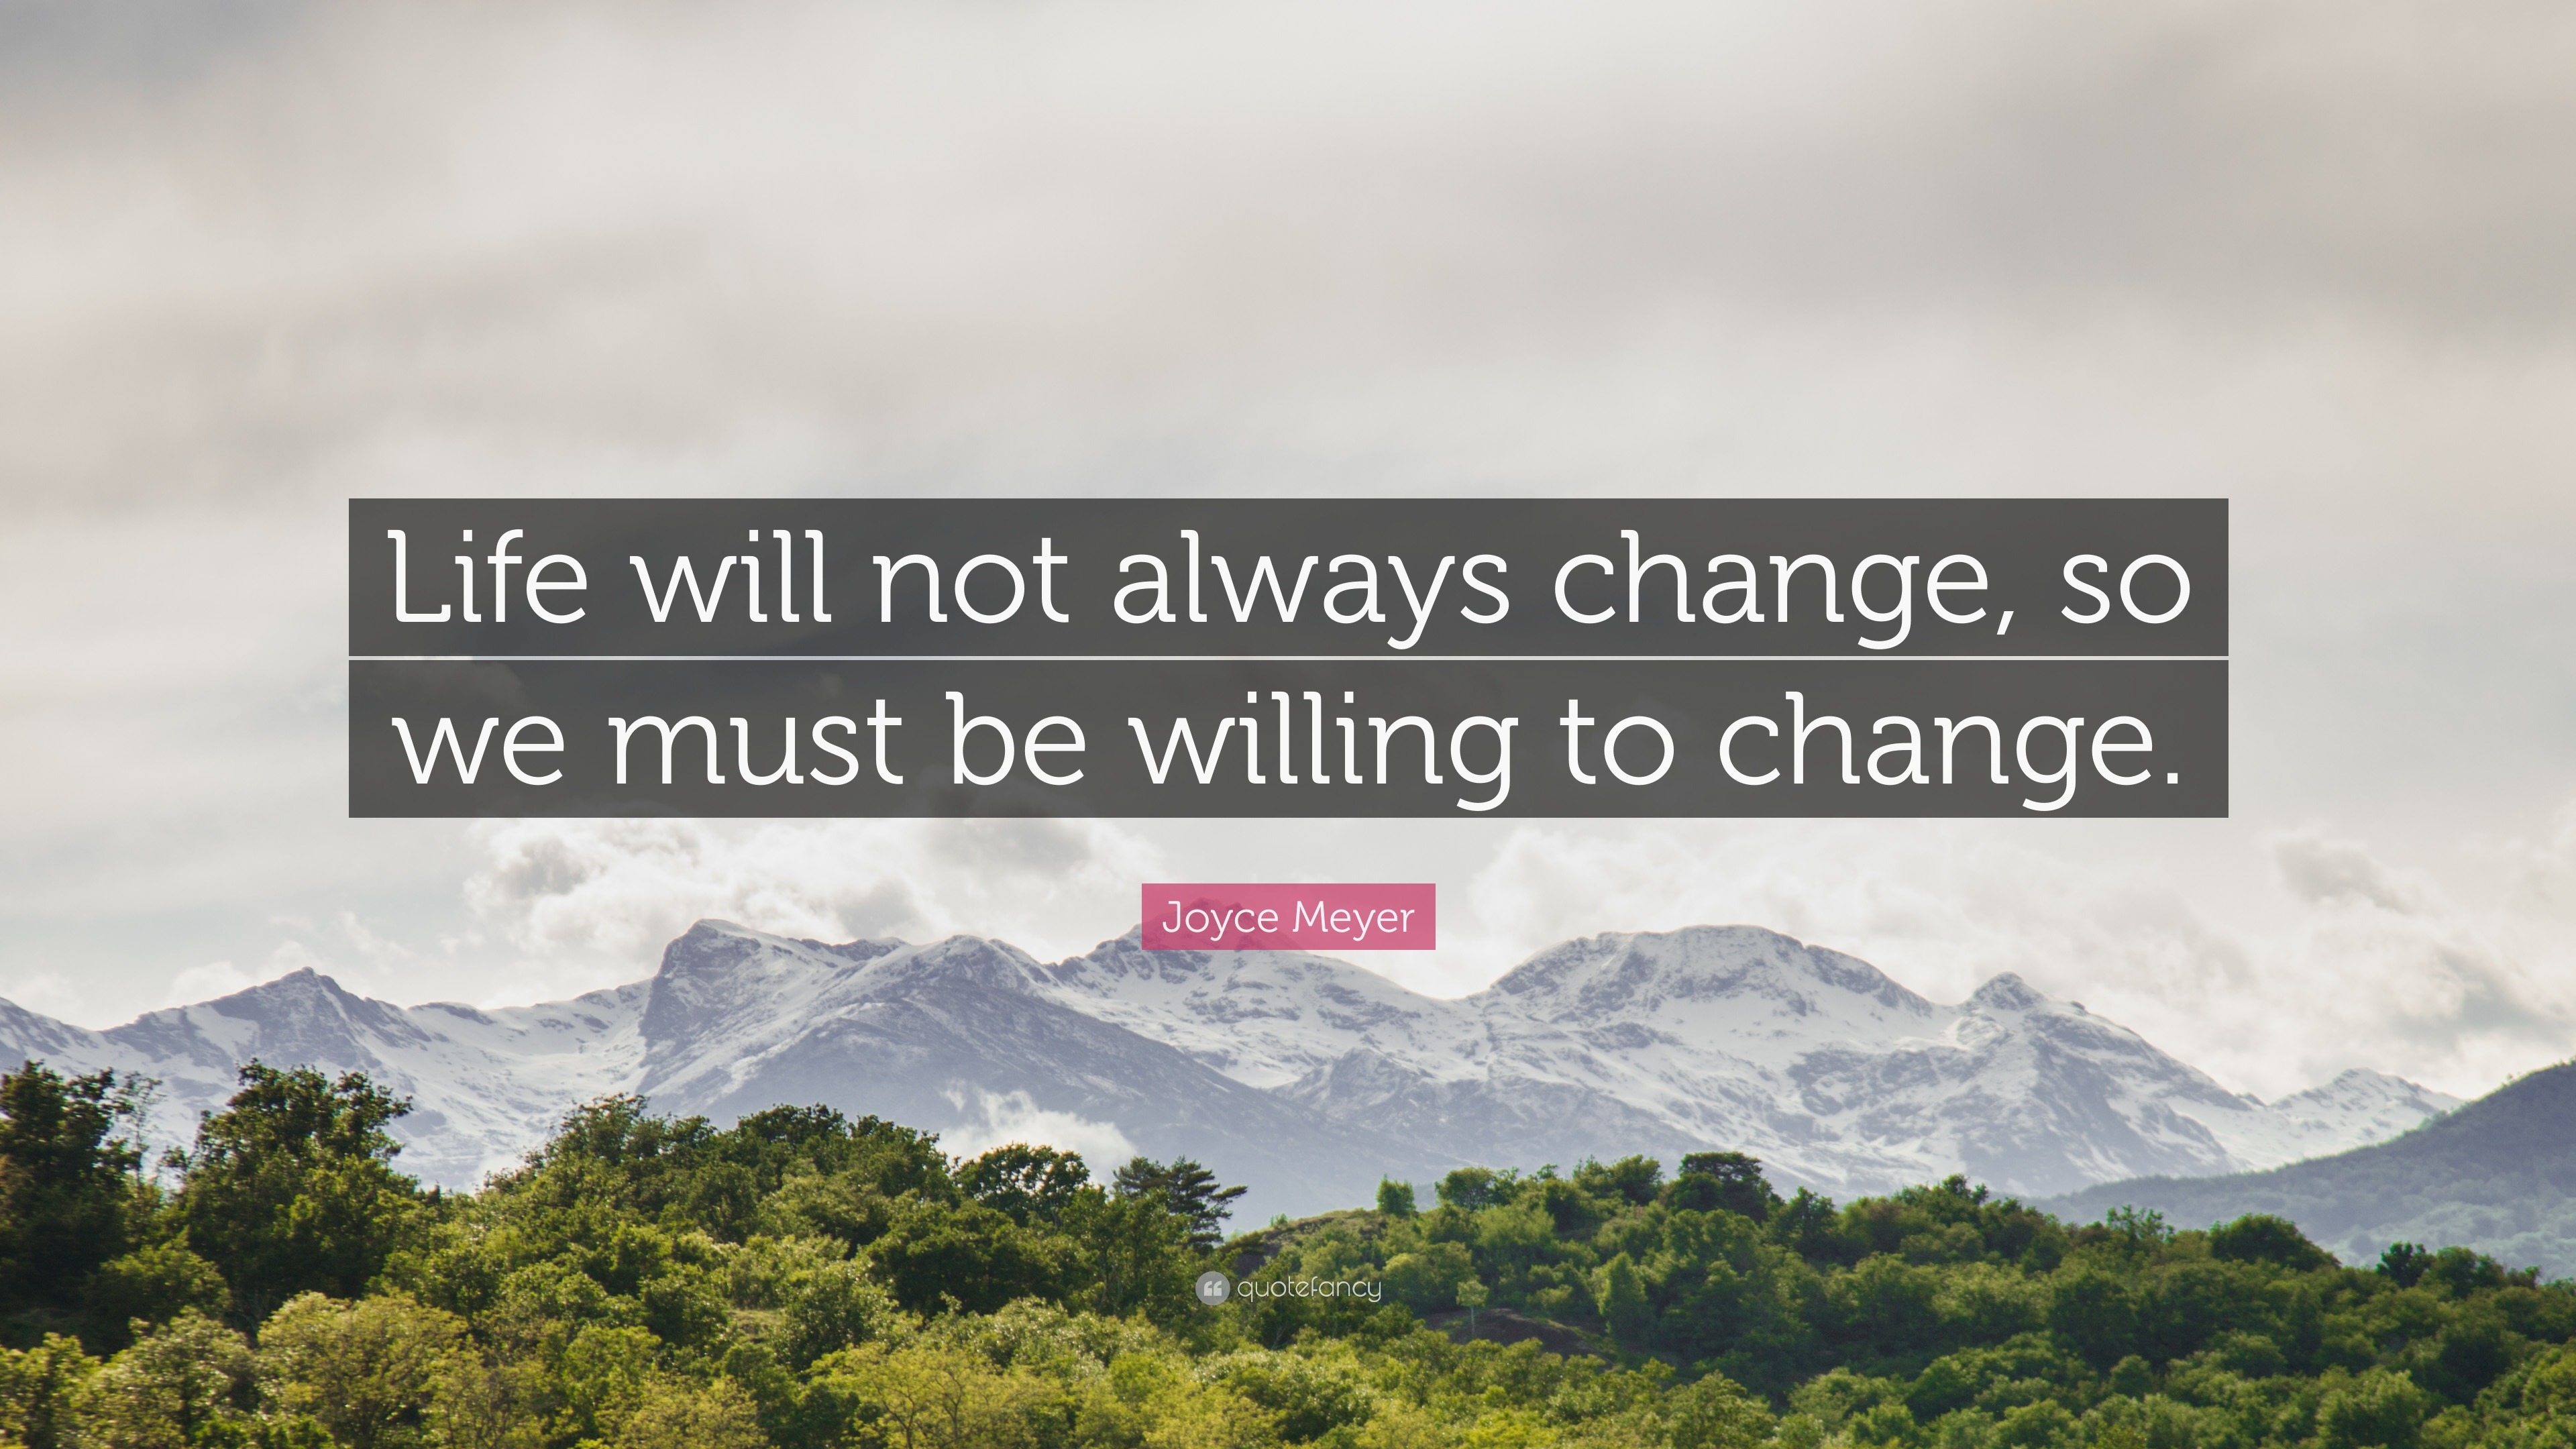 Joyce Meyer Quote: “Life will not always change, so we must be willing ...